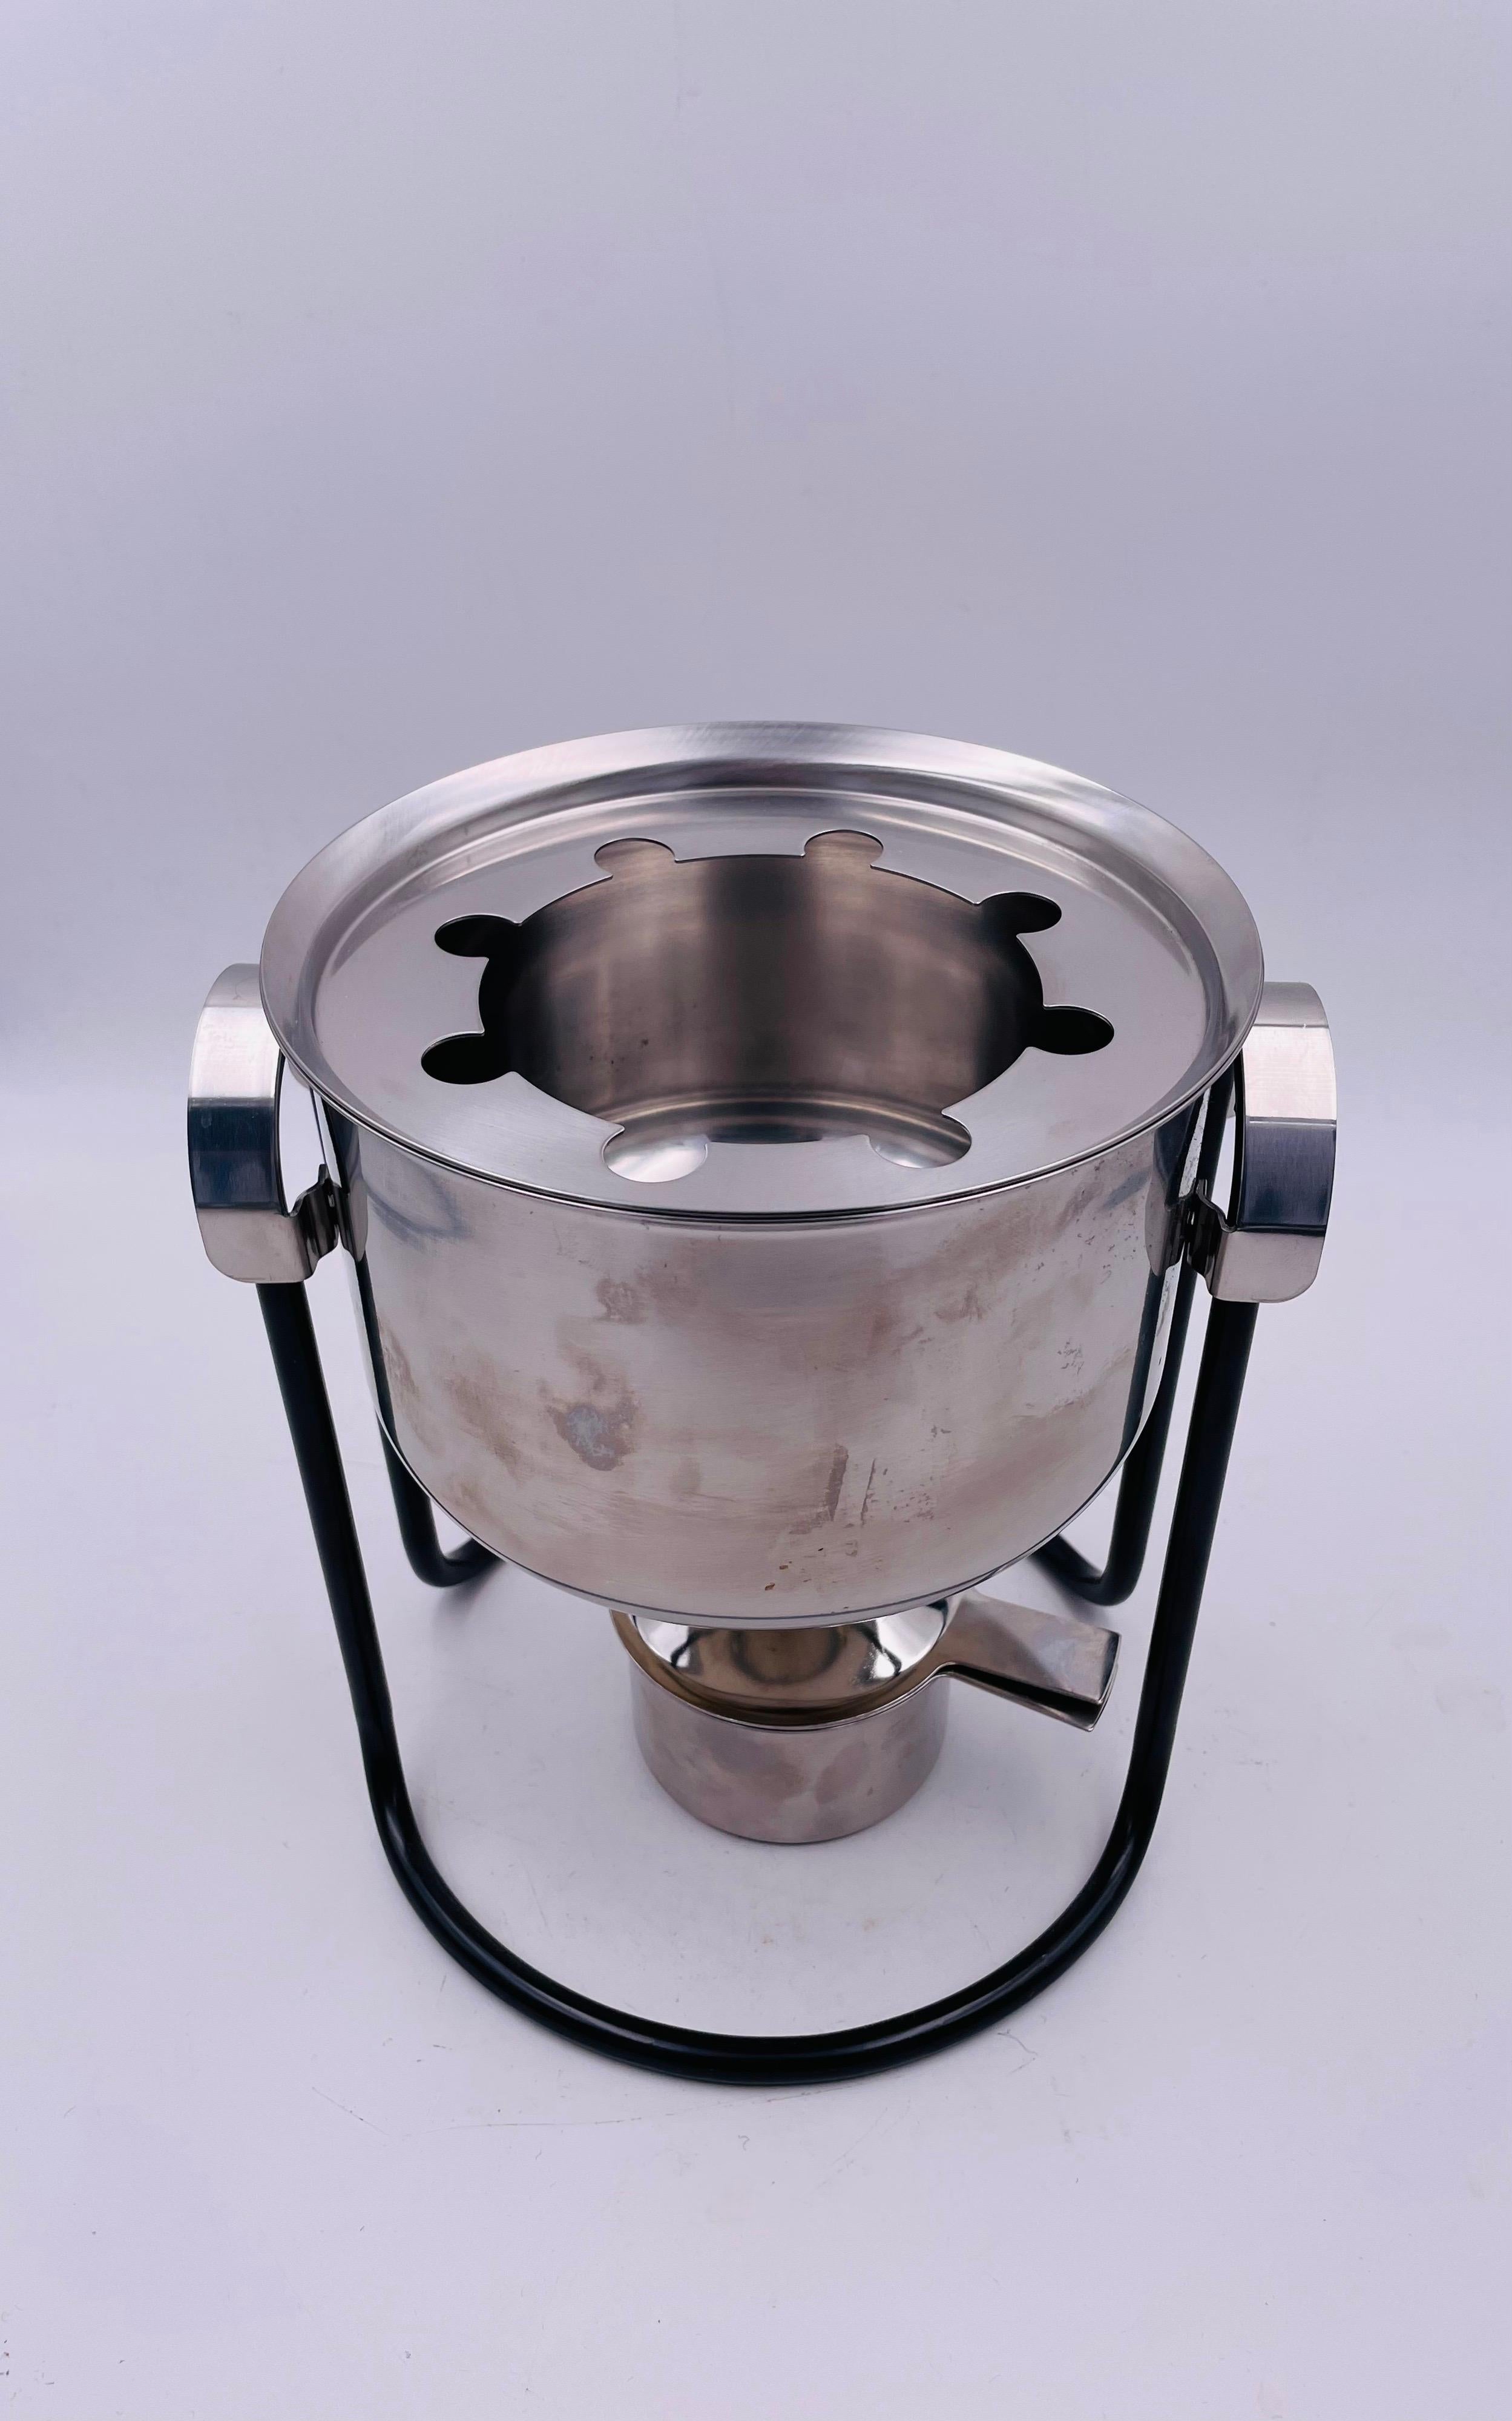 Cool and great design stainless steel fondue pot, by Stelton great condition and great for parties.